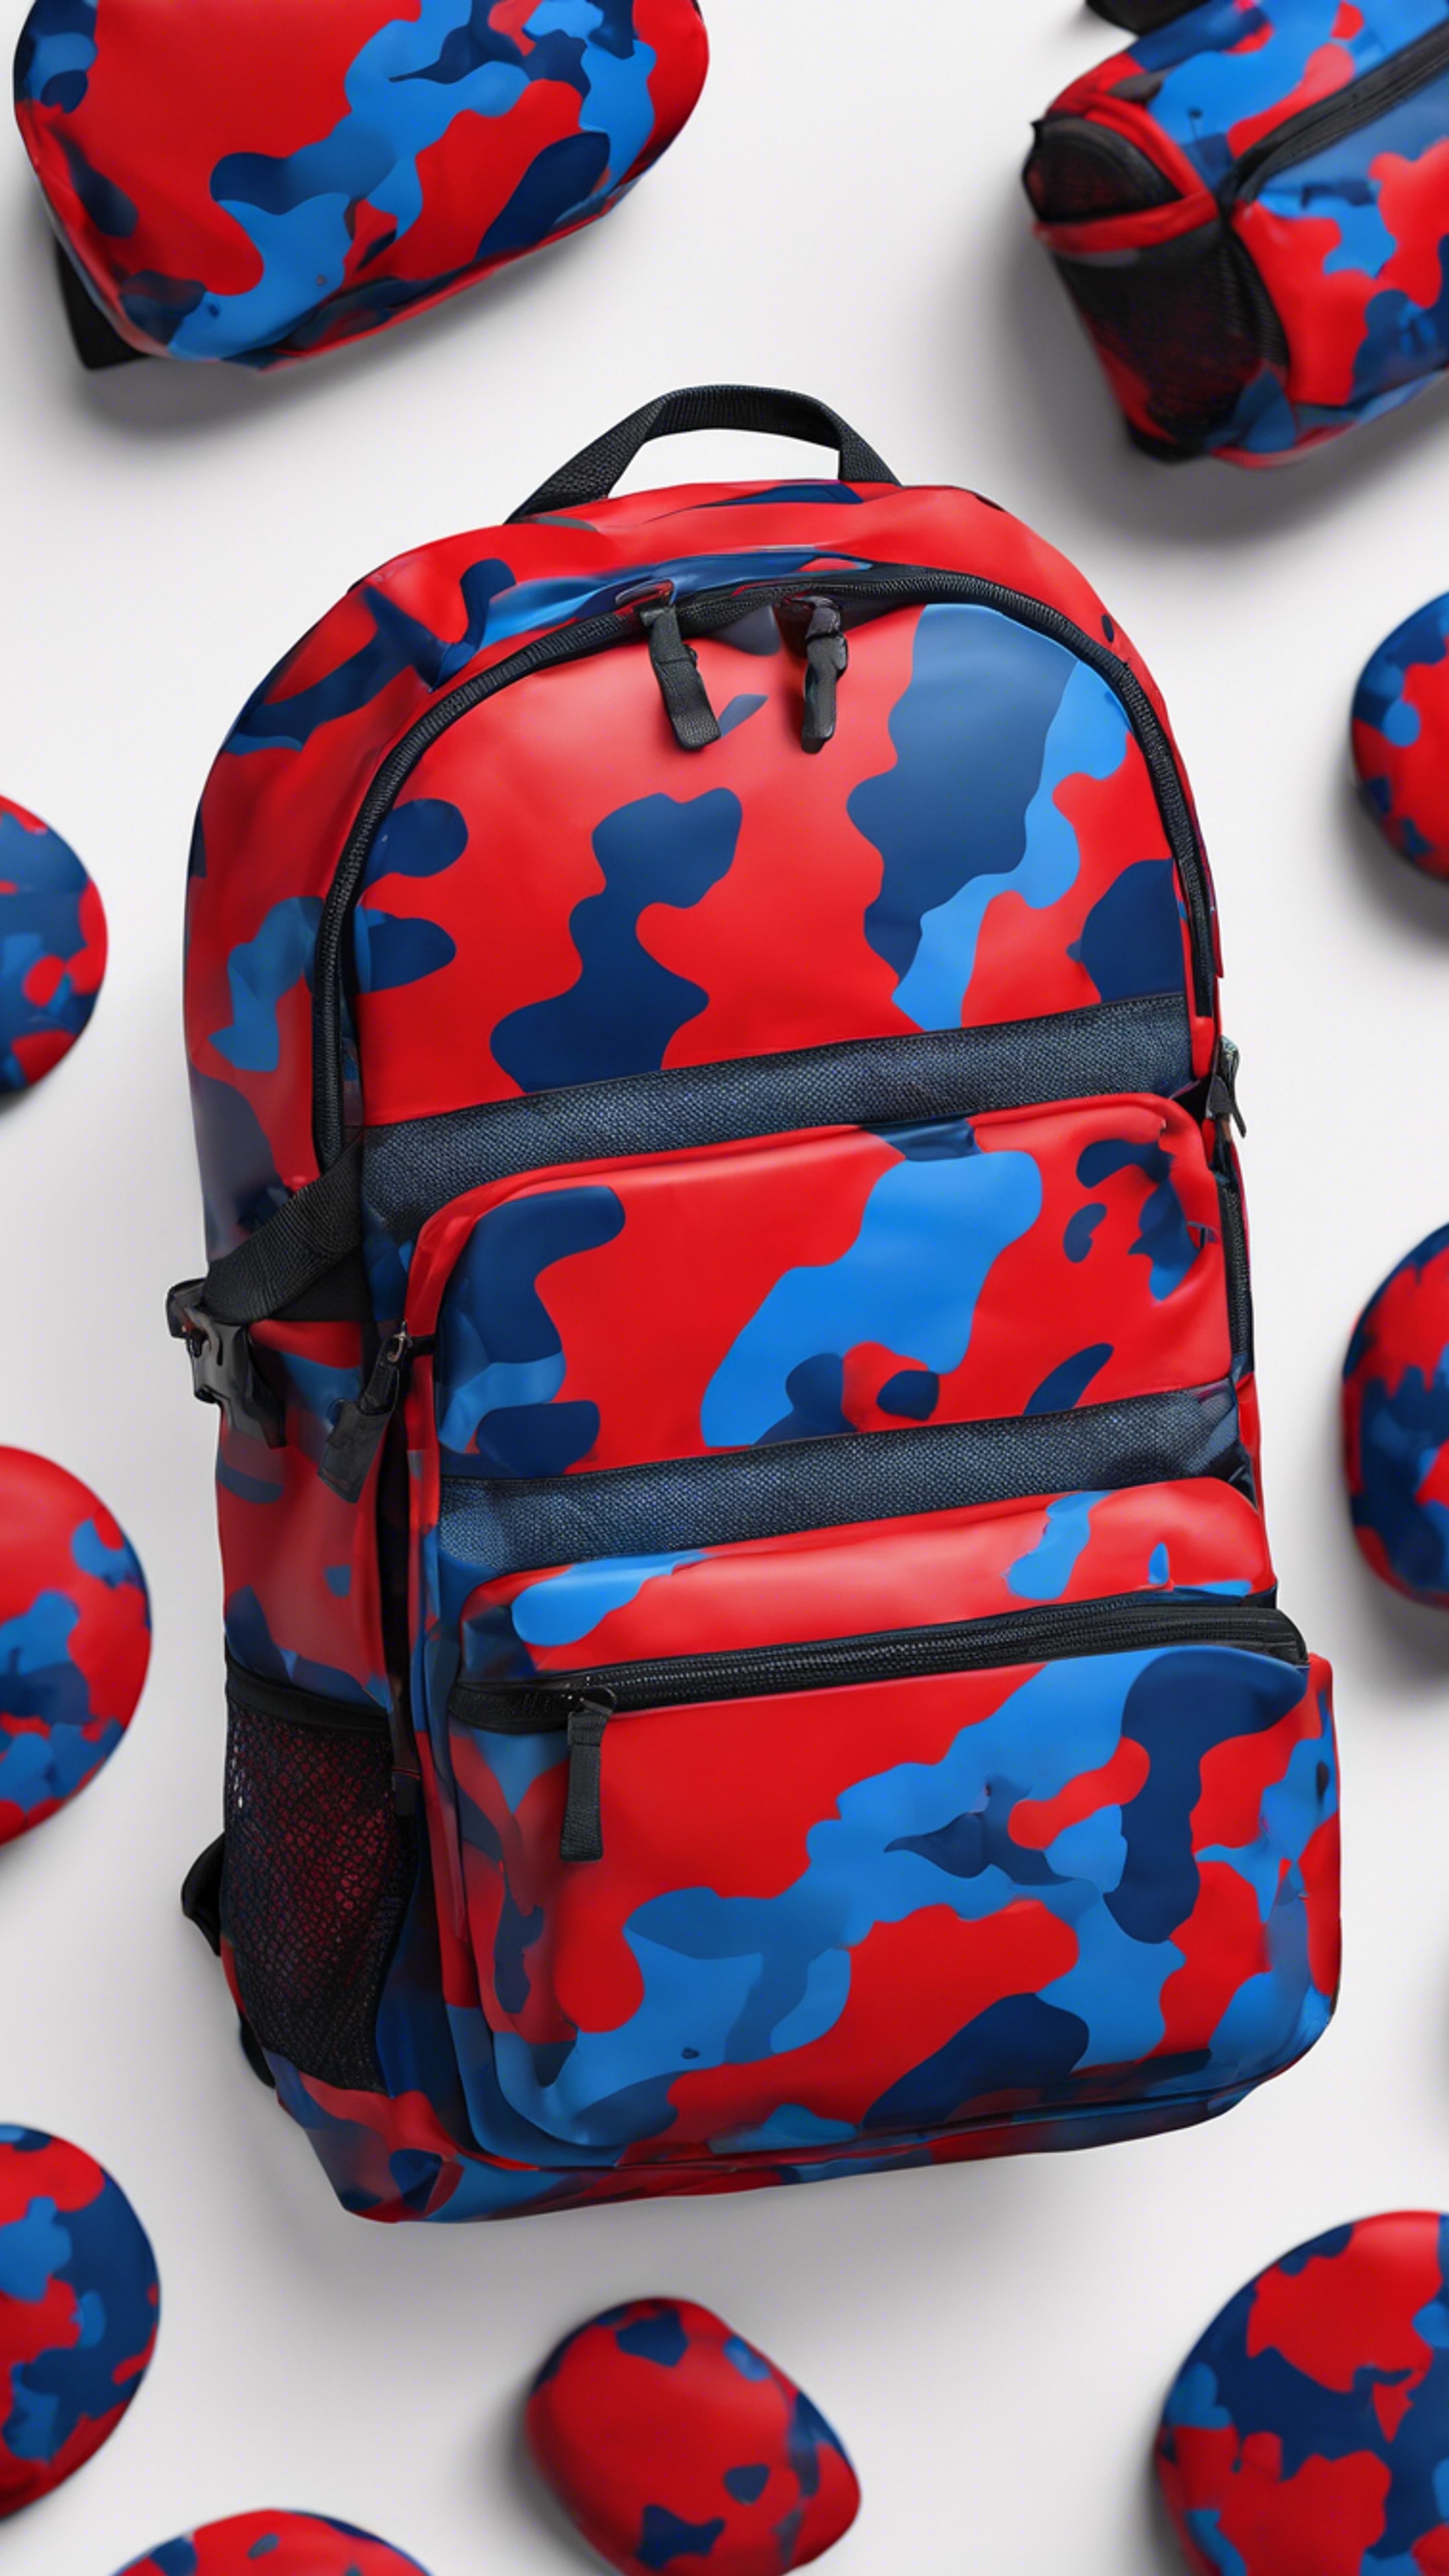 A seamless pattern of red and blue camouflage like on a sports backpack. Шпалери[ebf2c58b20f943e08eab]